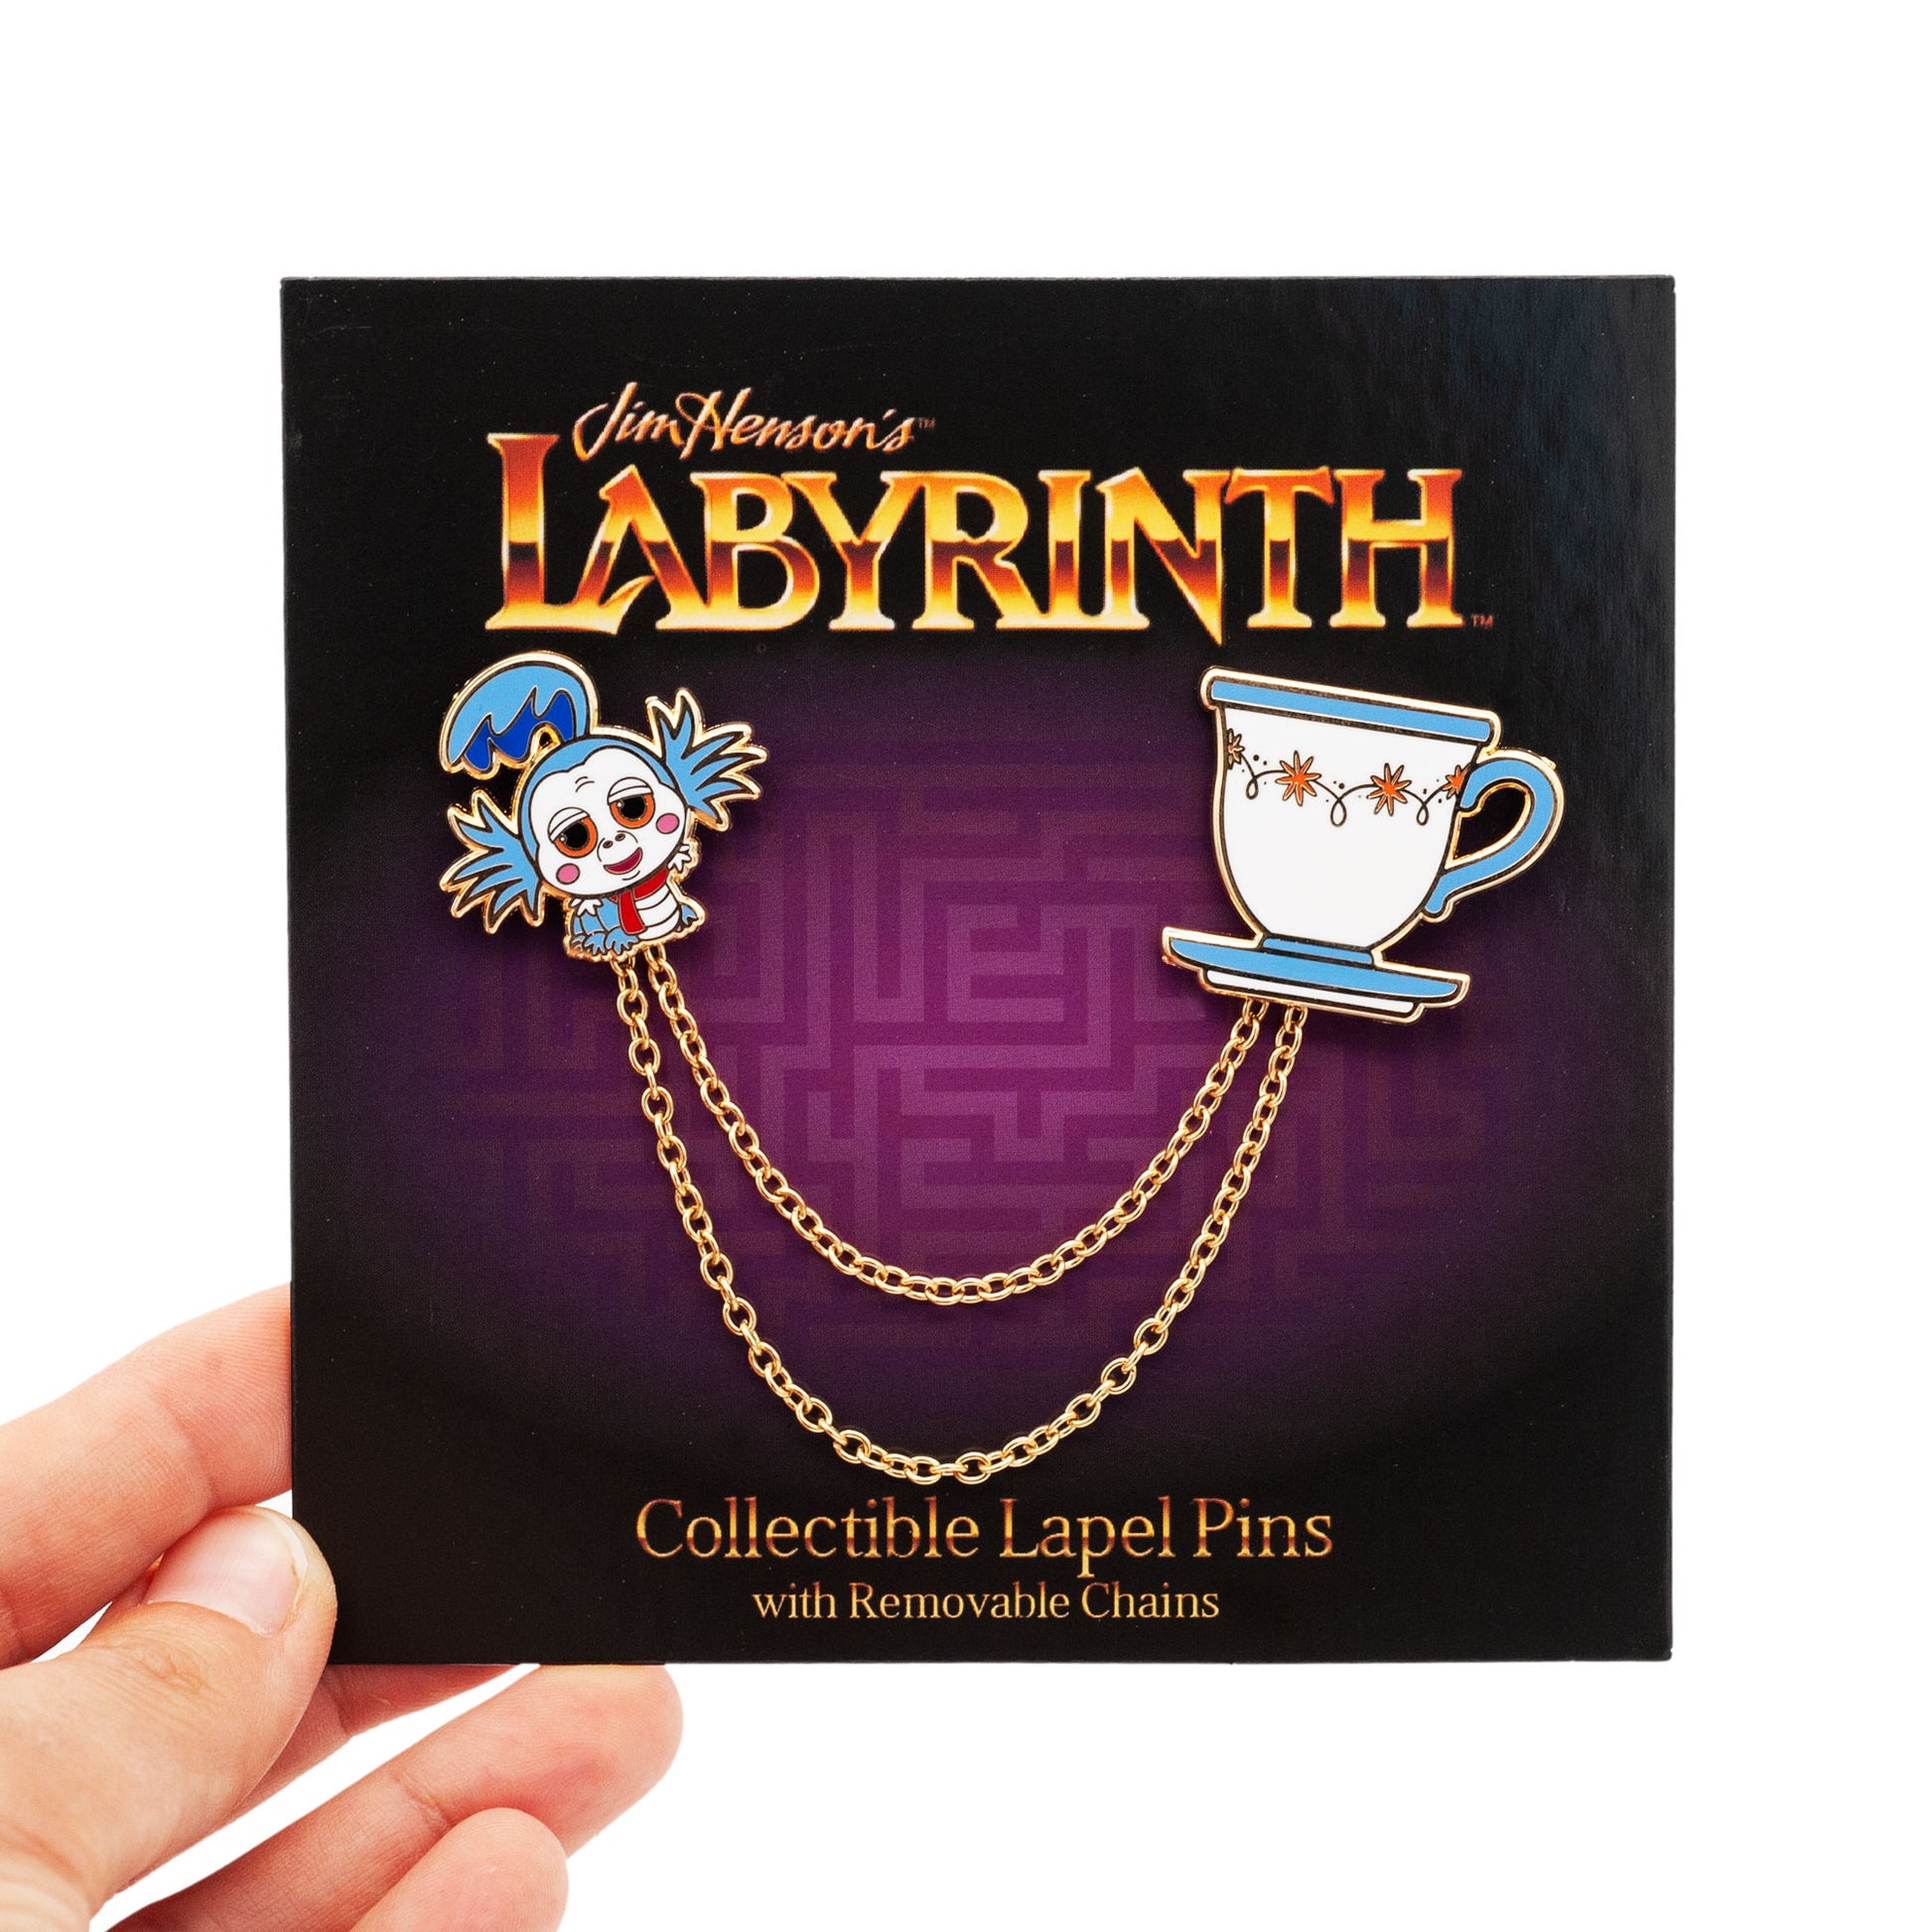 the worm and teacup lapel pins and connecting chains, on purple labyrinth backing card. card is being held by a hand against a white background.